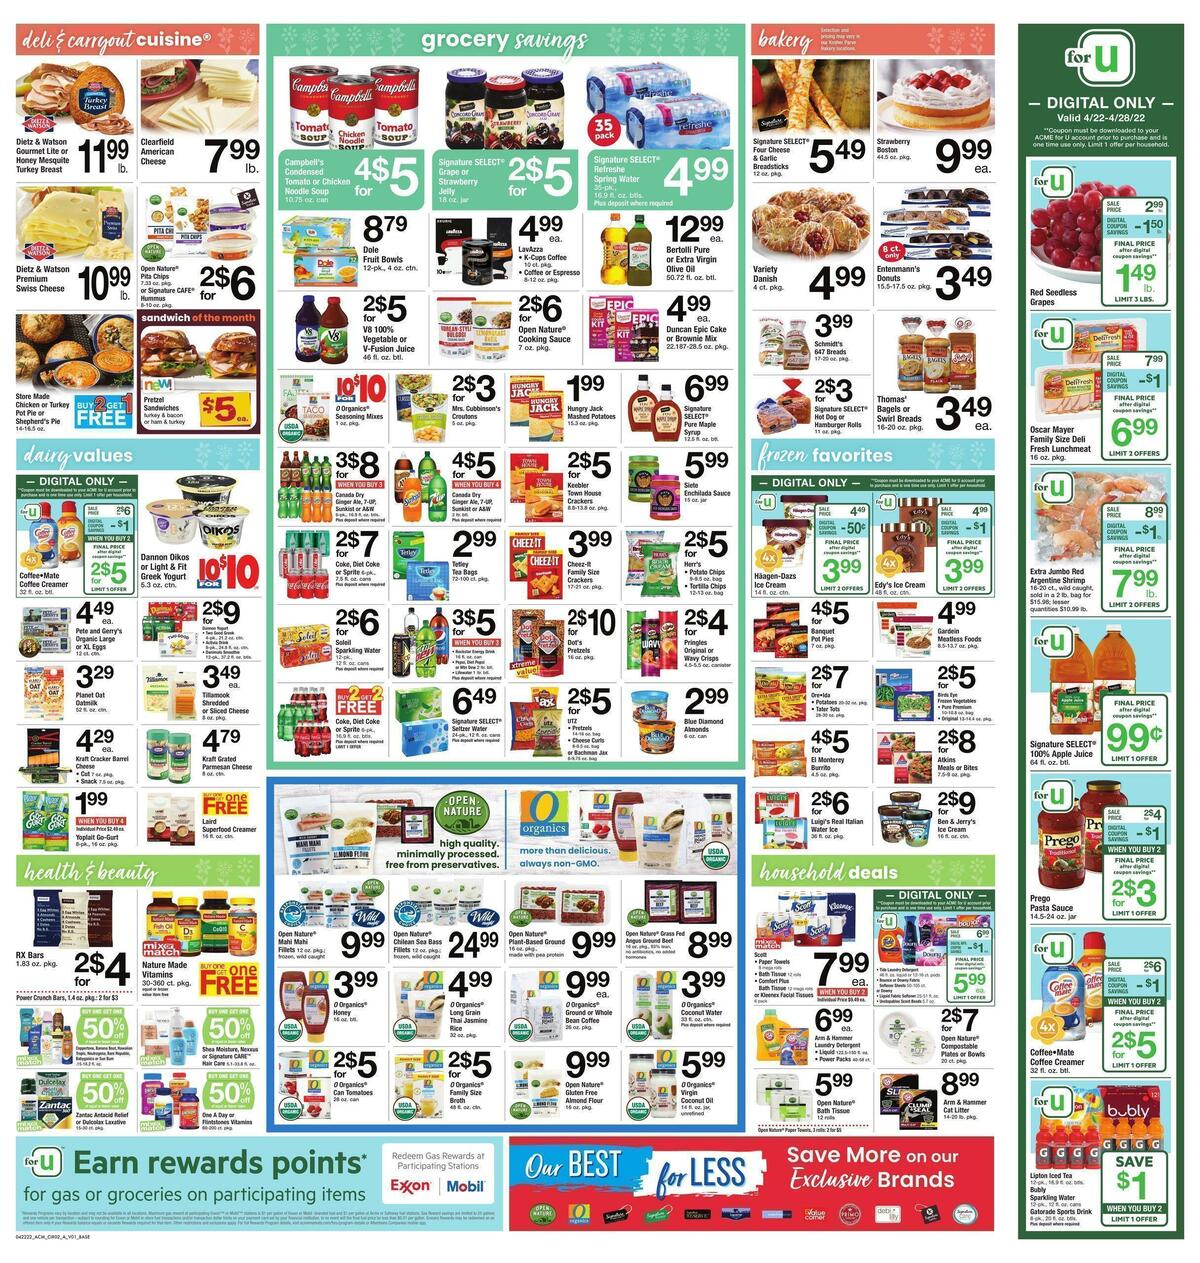 ACME Markets Weekly Ad from April 22